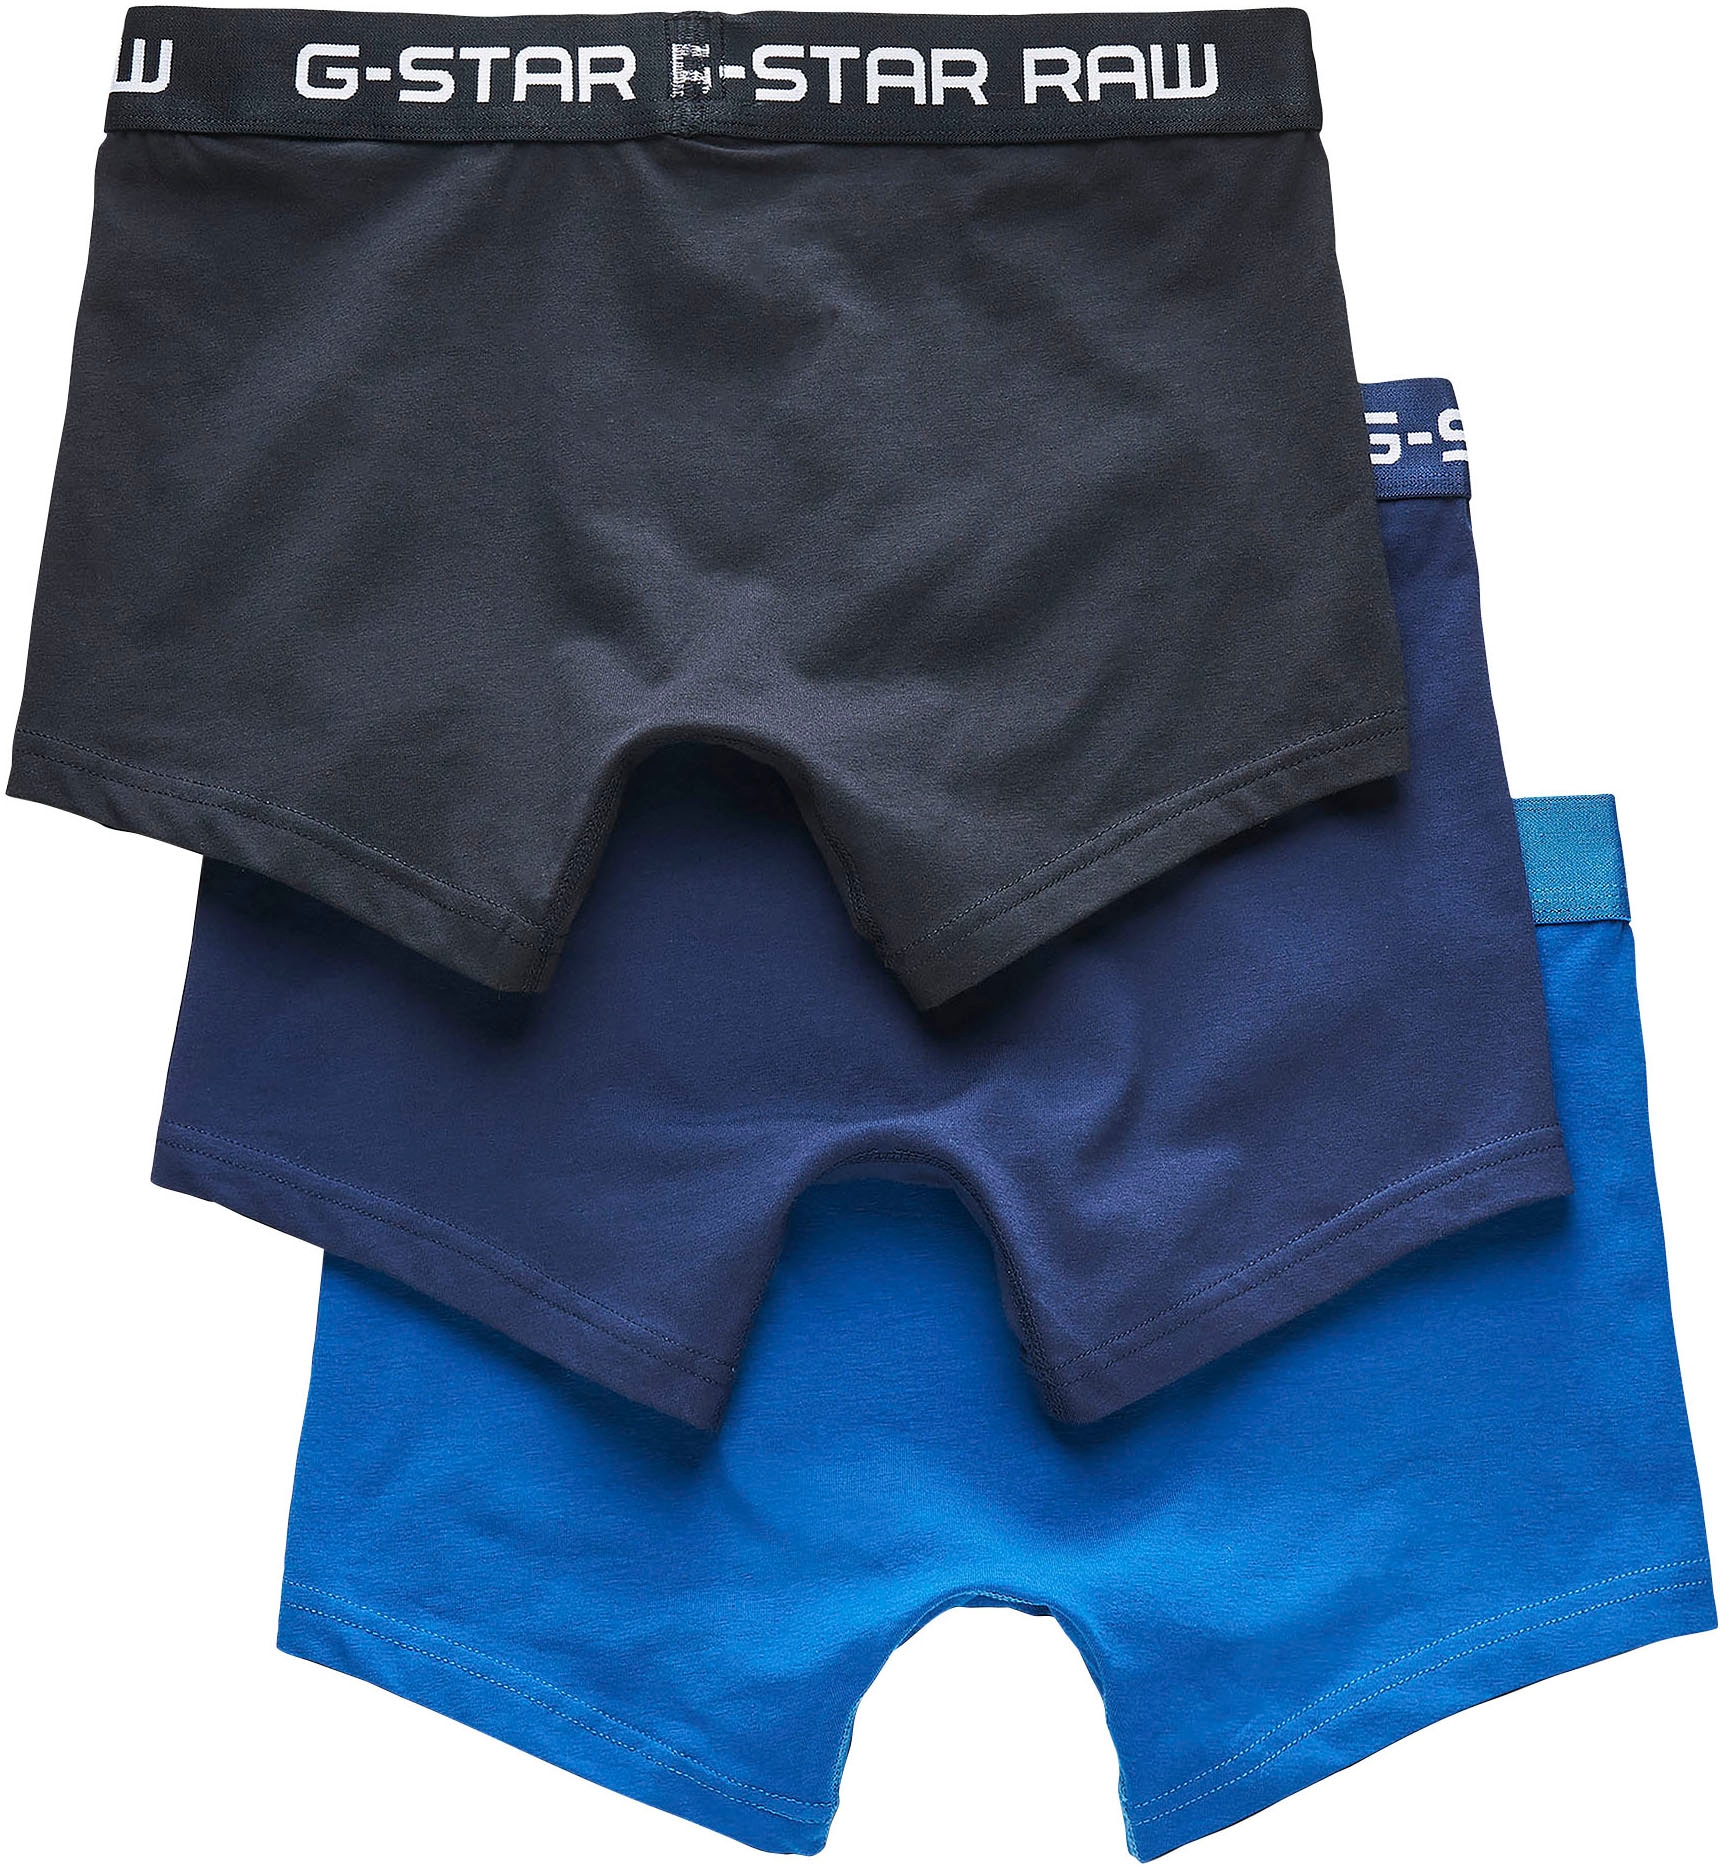 Boxer »Classic trunk clr 3 pack«, (3 St., 3er-Pack)